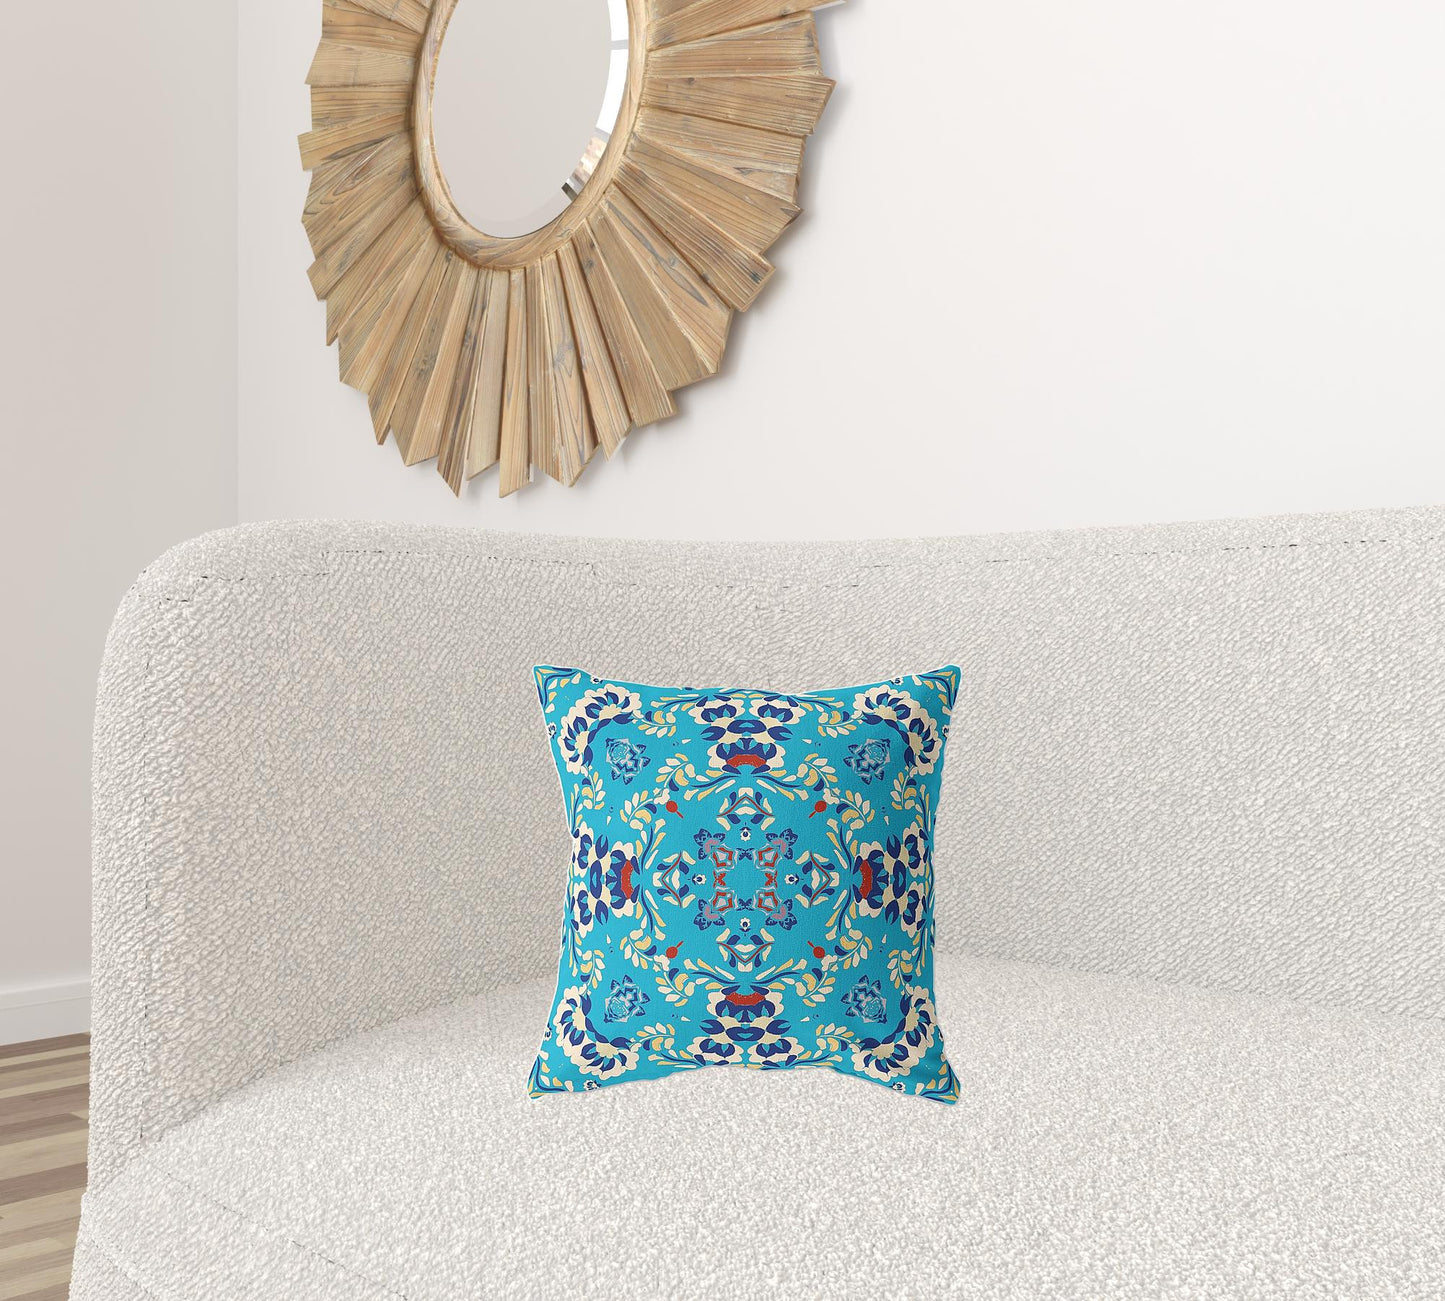 16" X 16" Blue Broadcloth Floral Throw Pillow